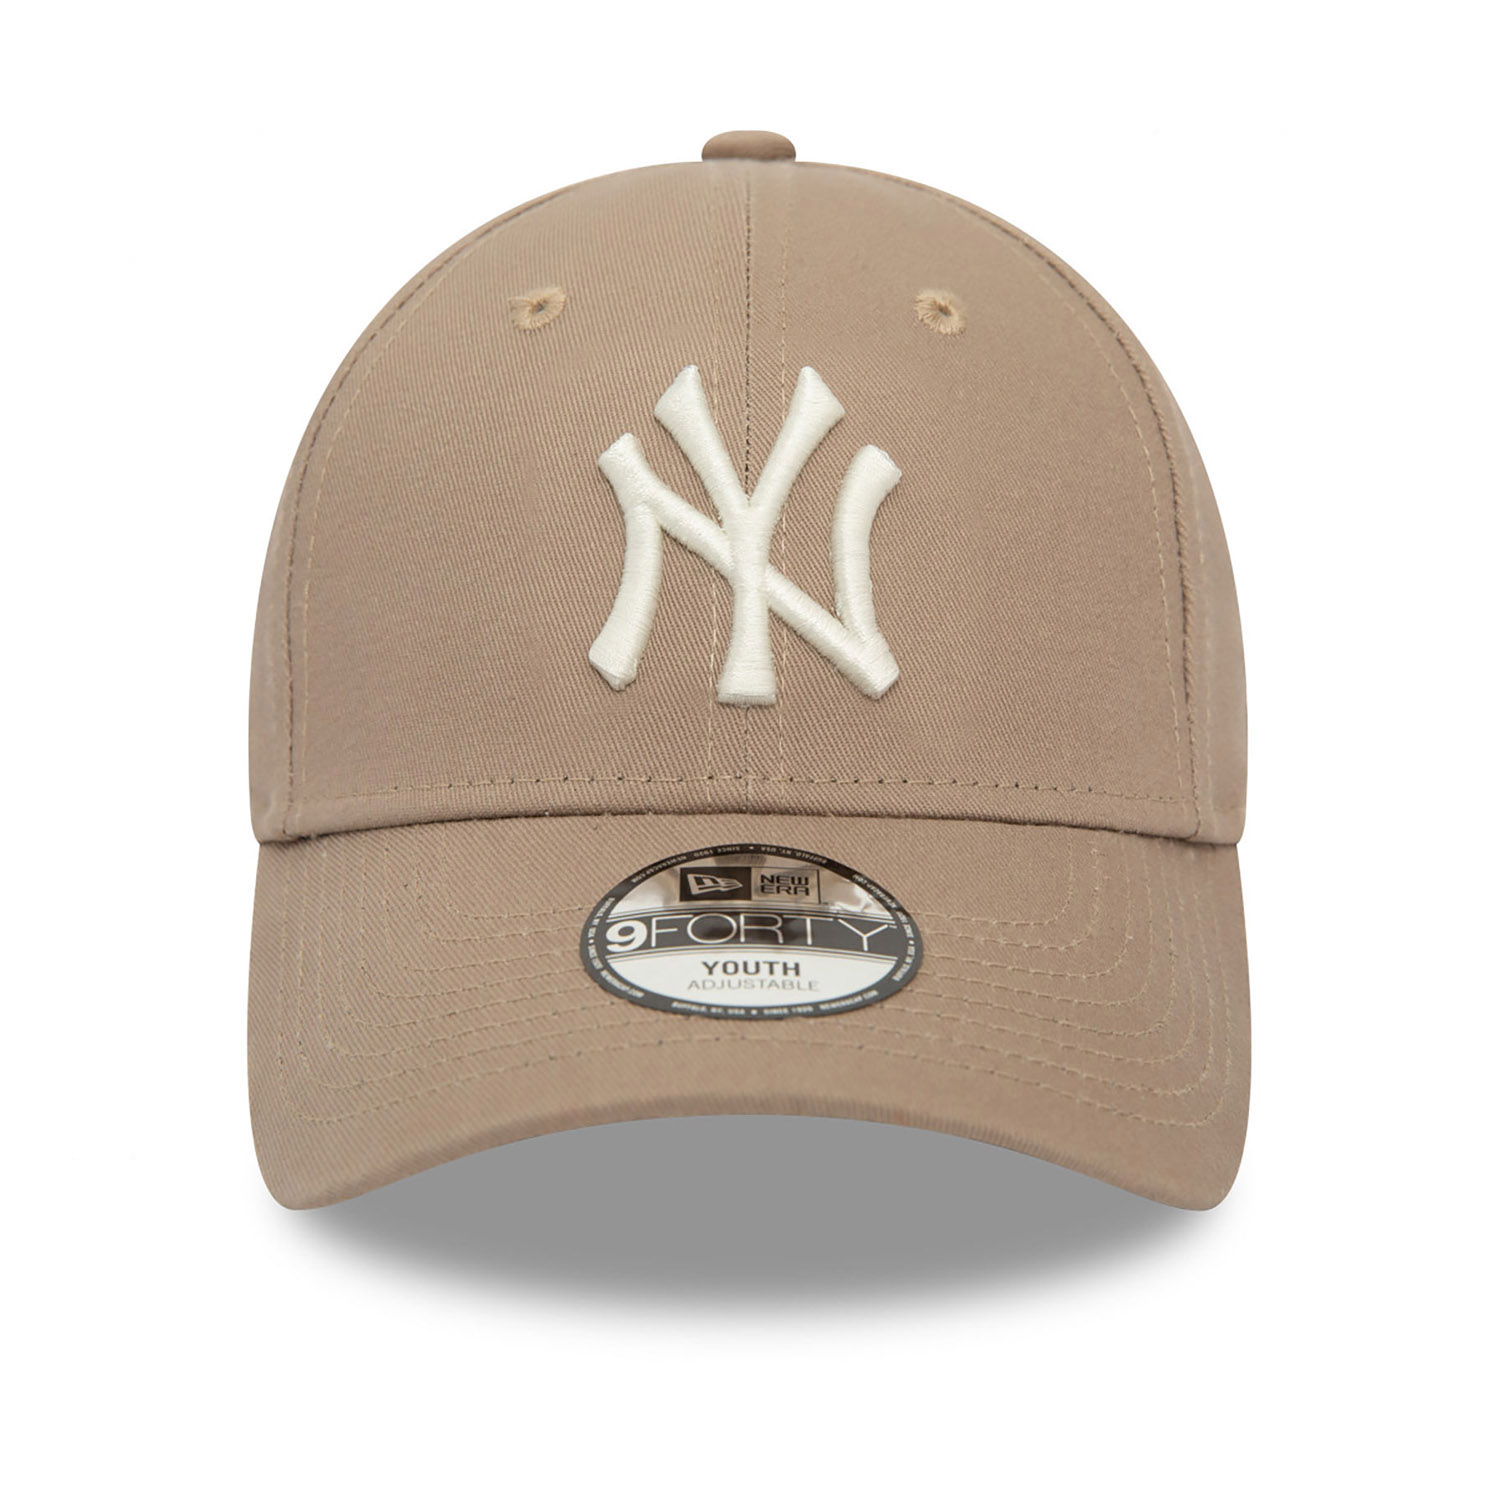 New York Yankees Youth League Essential Beige 9FORTY Adjustable Cap